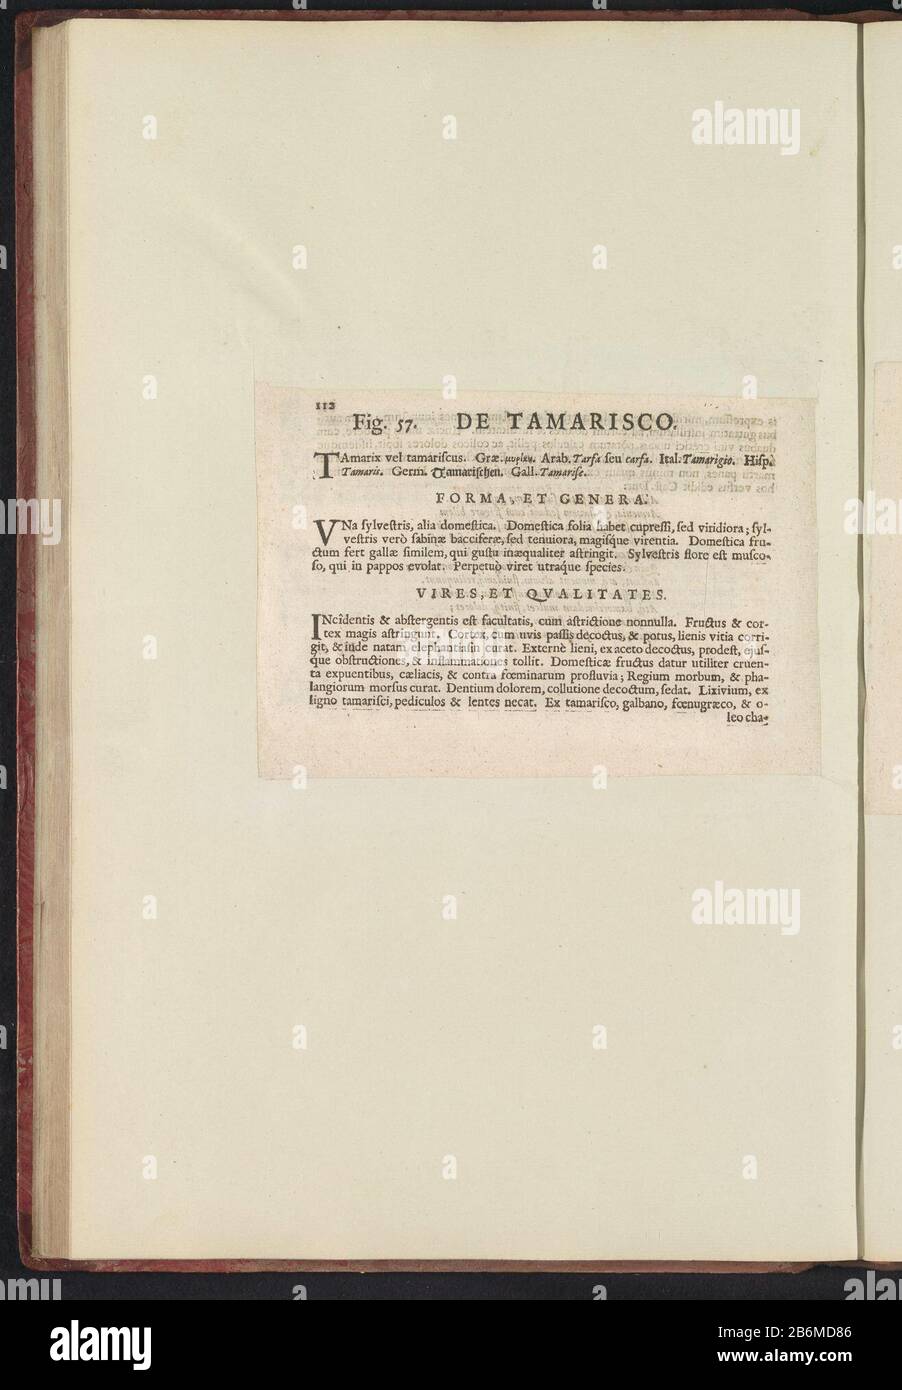 Fig 57 'De Tamarisco' in De Boodts herbarium van 1640 Fig. 57 'The Tamarisco' in the herbarium of Boodts 1640 Object Type : Text sheet Item number: RP-T-BR-2017-1-12-63 (V) Description: Description with reference to FIG. 57 at p. 112: Anselmi Boëtii the Boot I.C. Brugensis & Rodolphi II. Imp. Novel. a medical cubiculis Florum, Herbarum, ac fructuum selectiorum icones, and vires pleraeque hactenus ignotæ. Part of the album with sheets and plates from the Boodts herbarium of 1640. The twelfth twelve albums of watercolors of animals, birds and plants are known around 1600, commissioned by Emperor Stock Photo